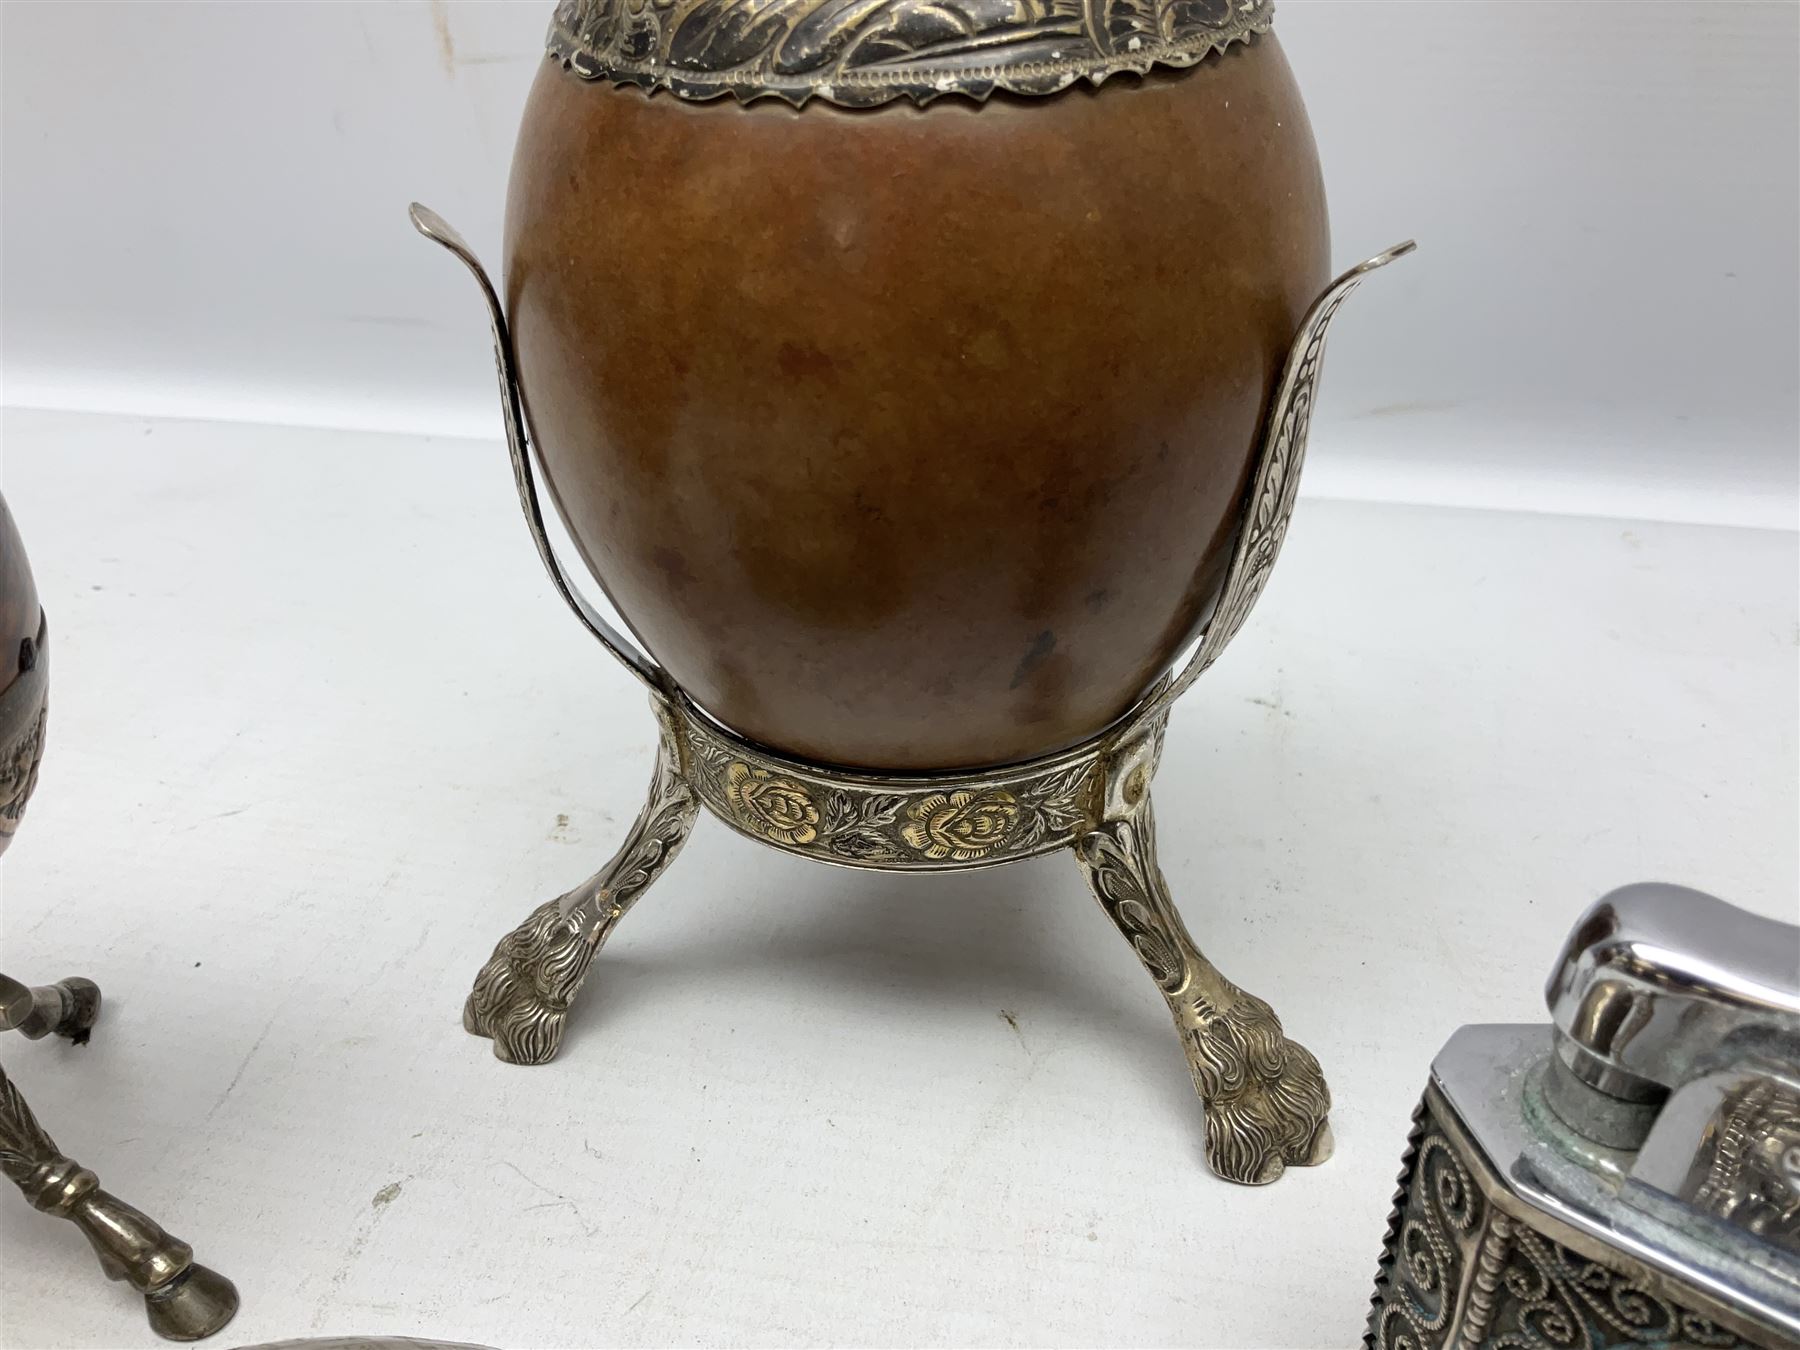 Yerba mate tea gourd calabash cup with silver-plated foliate mounts raised upon three hoof feet - Image 8 of 11